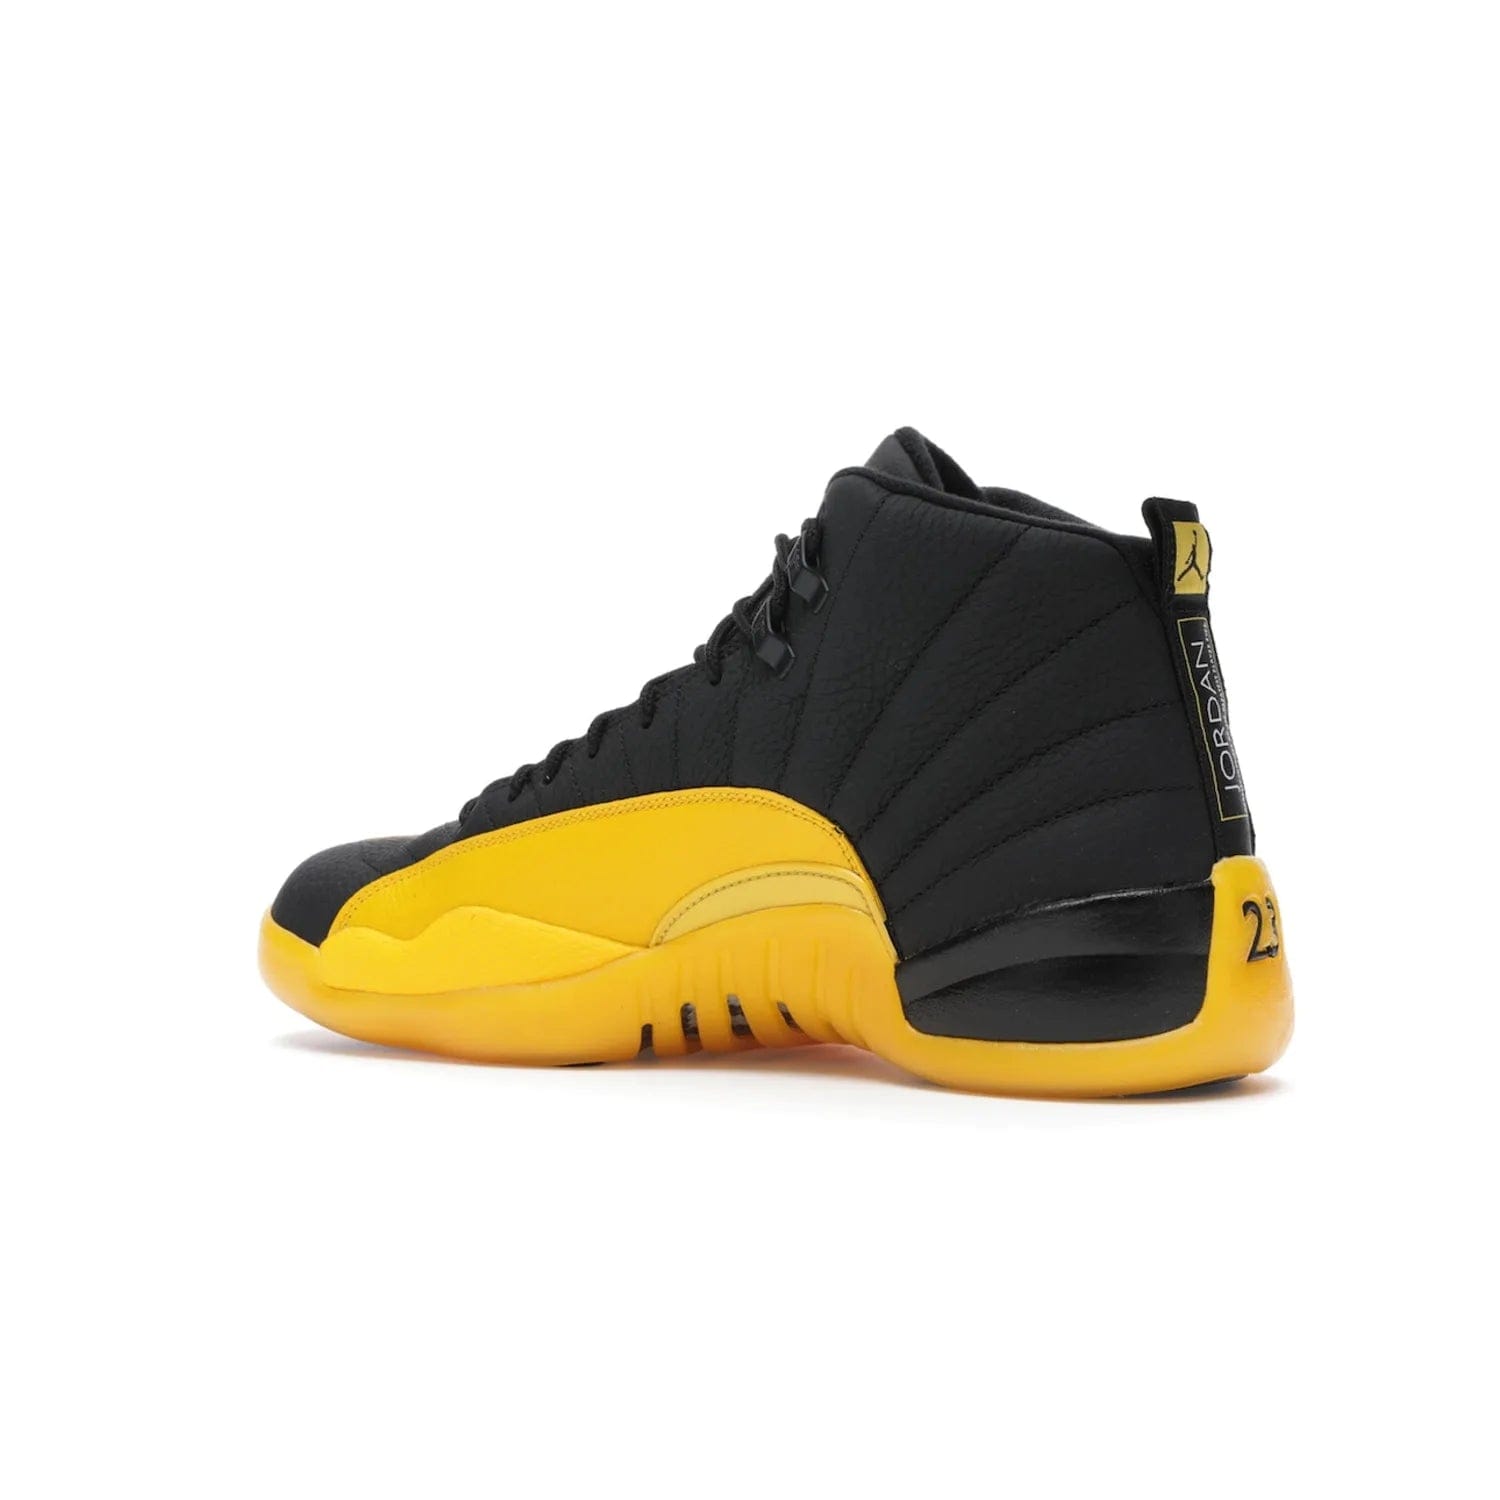 Jordan 12 Retro Black University Gold - Image 22 - Only at www.BallersClubKickz.com - This Jordan 12 Retro features a black tumbled leather upper and University Gold accents for a modern twist. Boasting Jordan "Two Three" branding and a yellow sole, these shoes will elevate your wardrobe. Fresh, sleek, and one of a kind - the Jordan 12 University Gold is your summer sneaker.